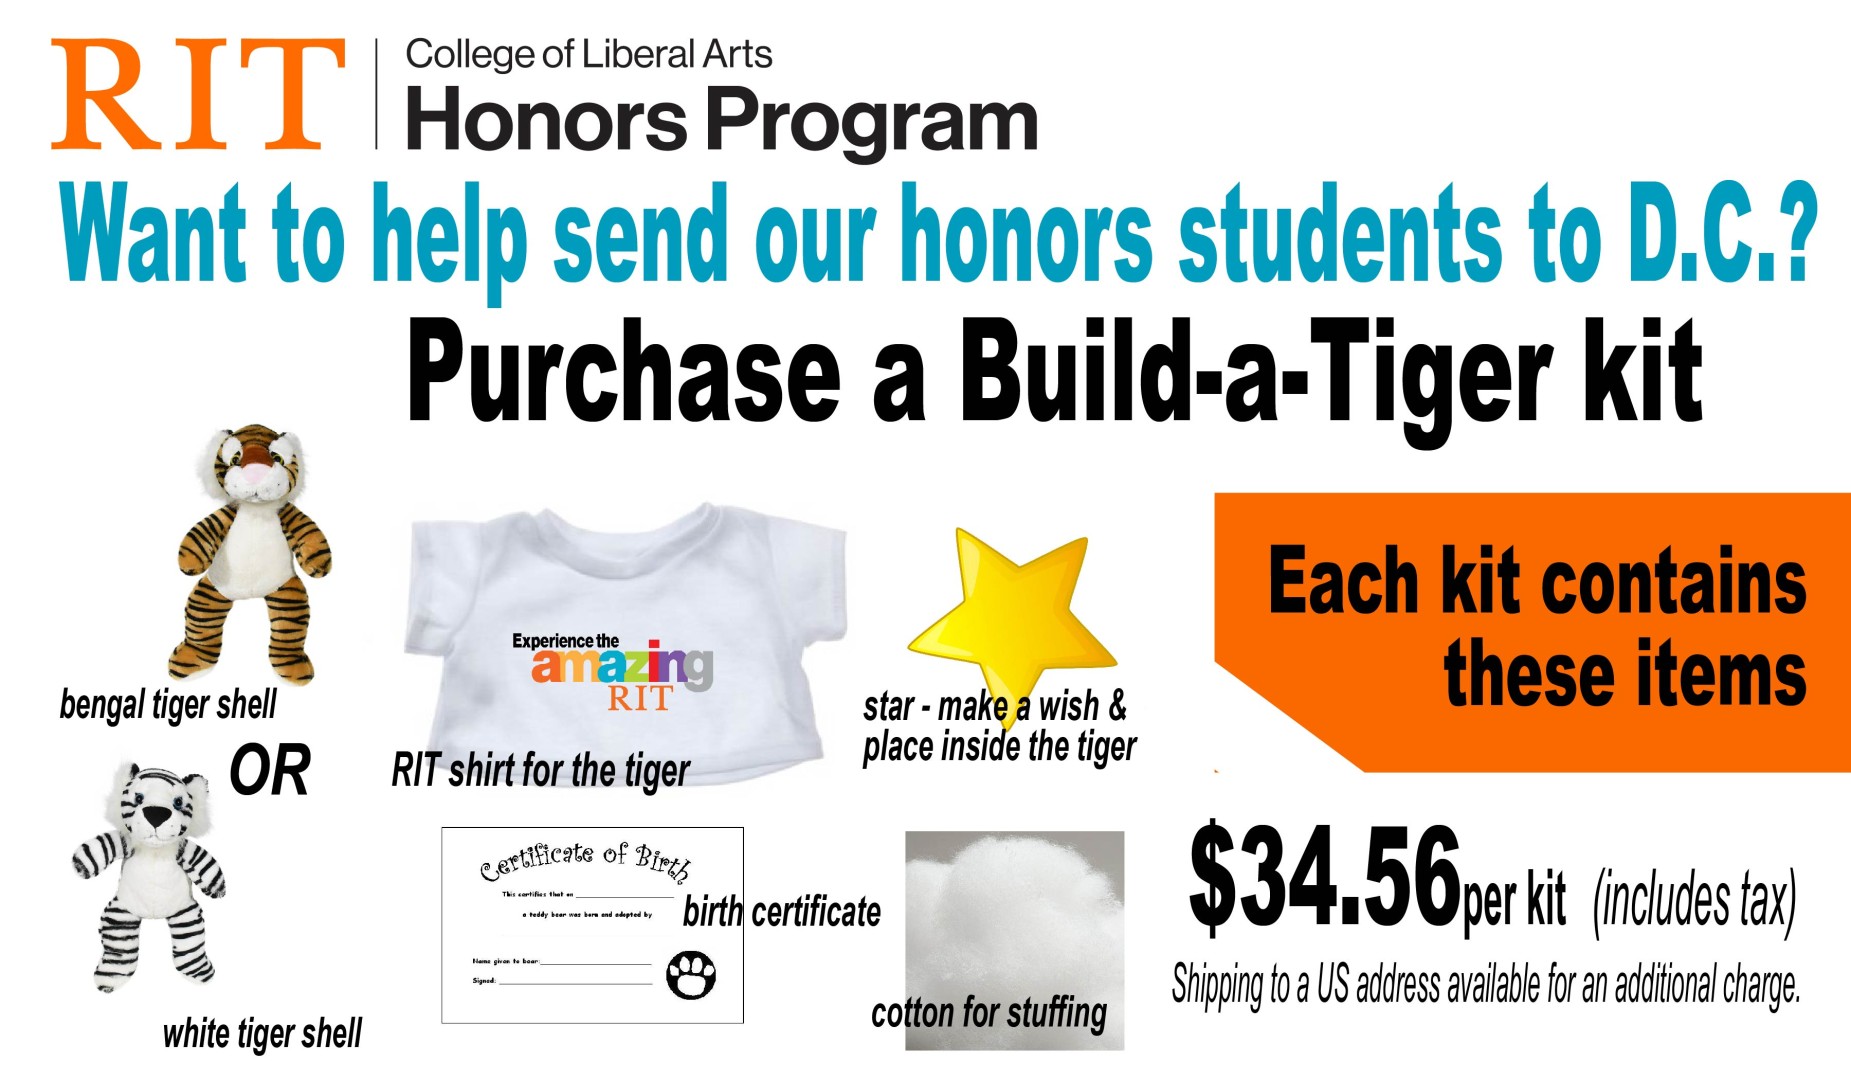 A white flyer with images of the tigers and text describing the fundraiser